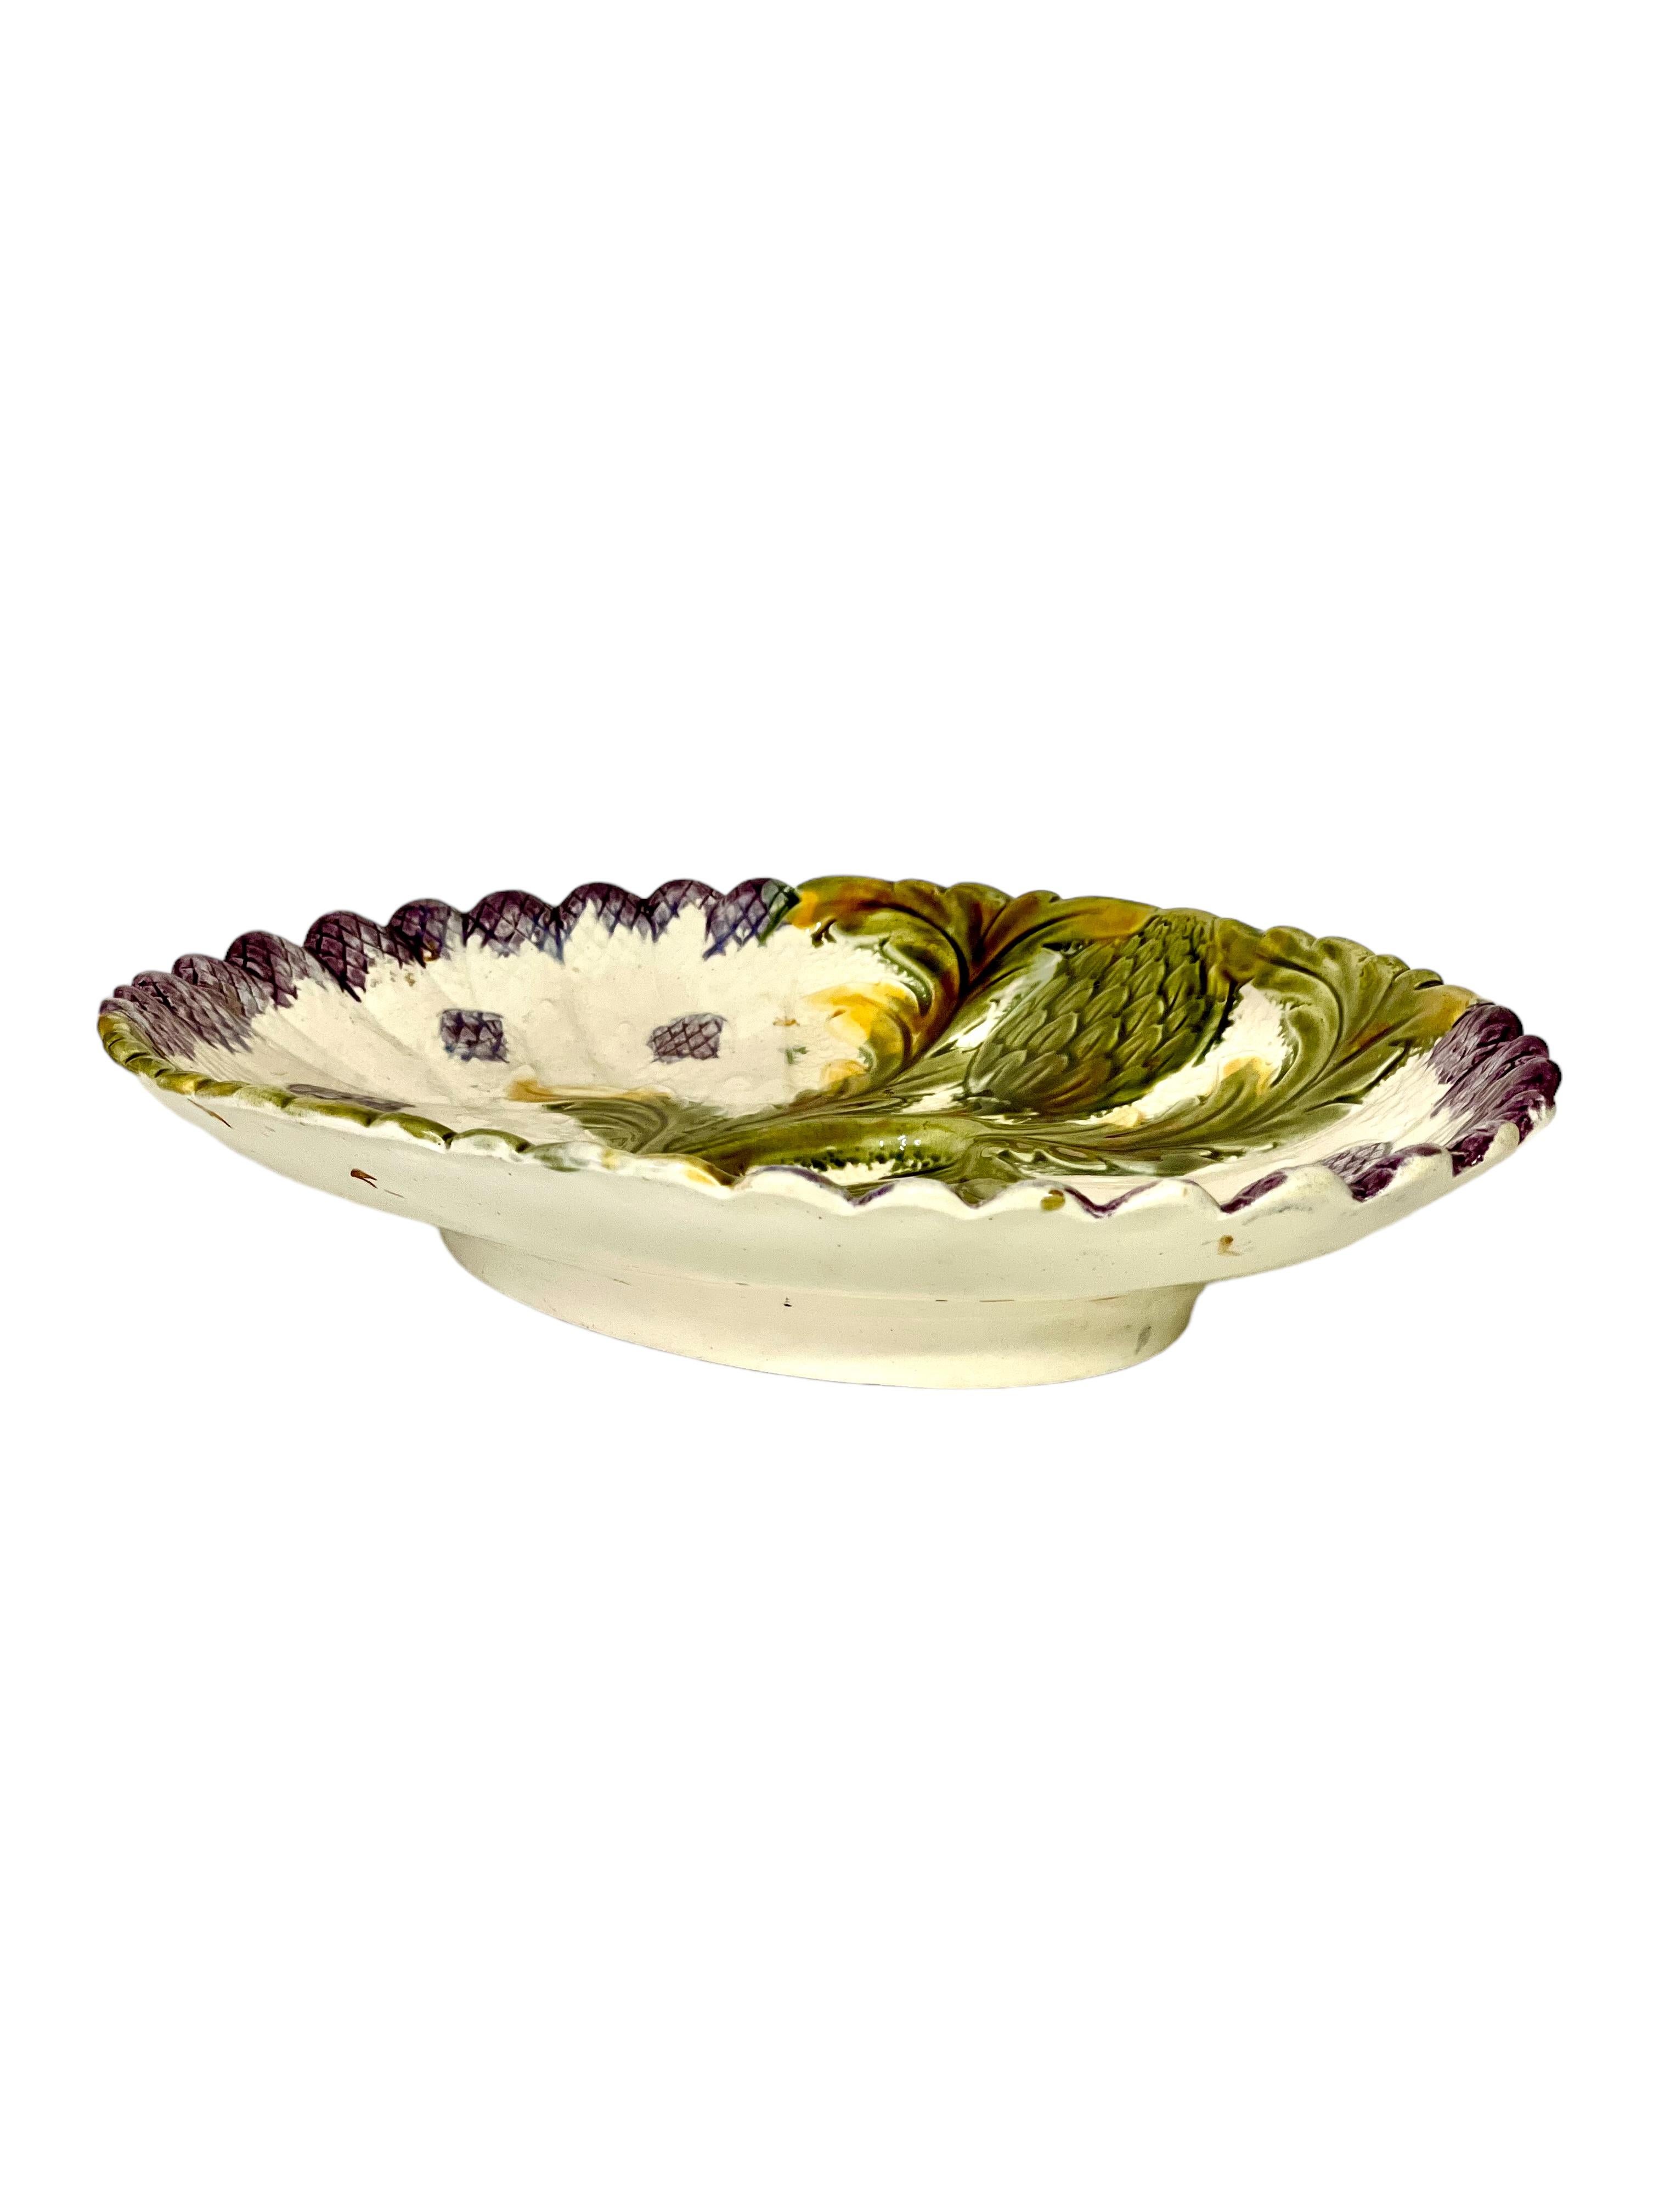 A very unusual and beautiful French barbotine majolica asparagus serving platter, oval in shape and featuring a typical 'trompe l'oeil' textured decoration of globe artichokes and purple asparagus tips, artfully entwined with each other to create a